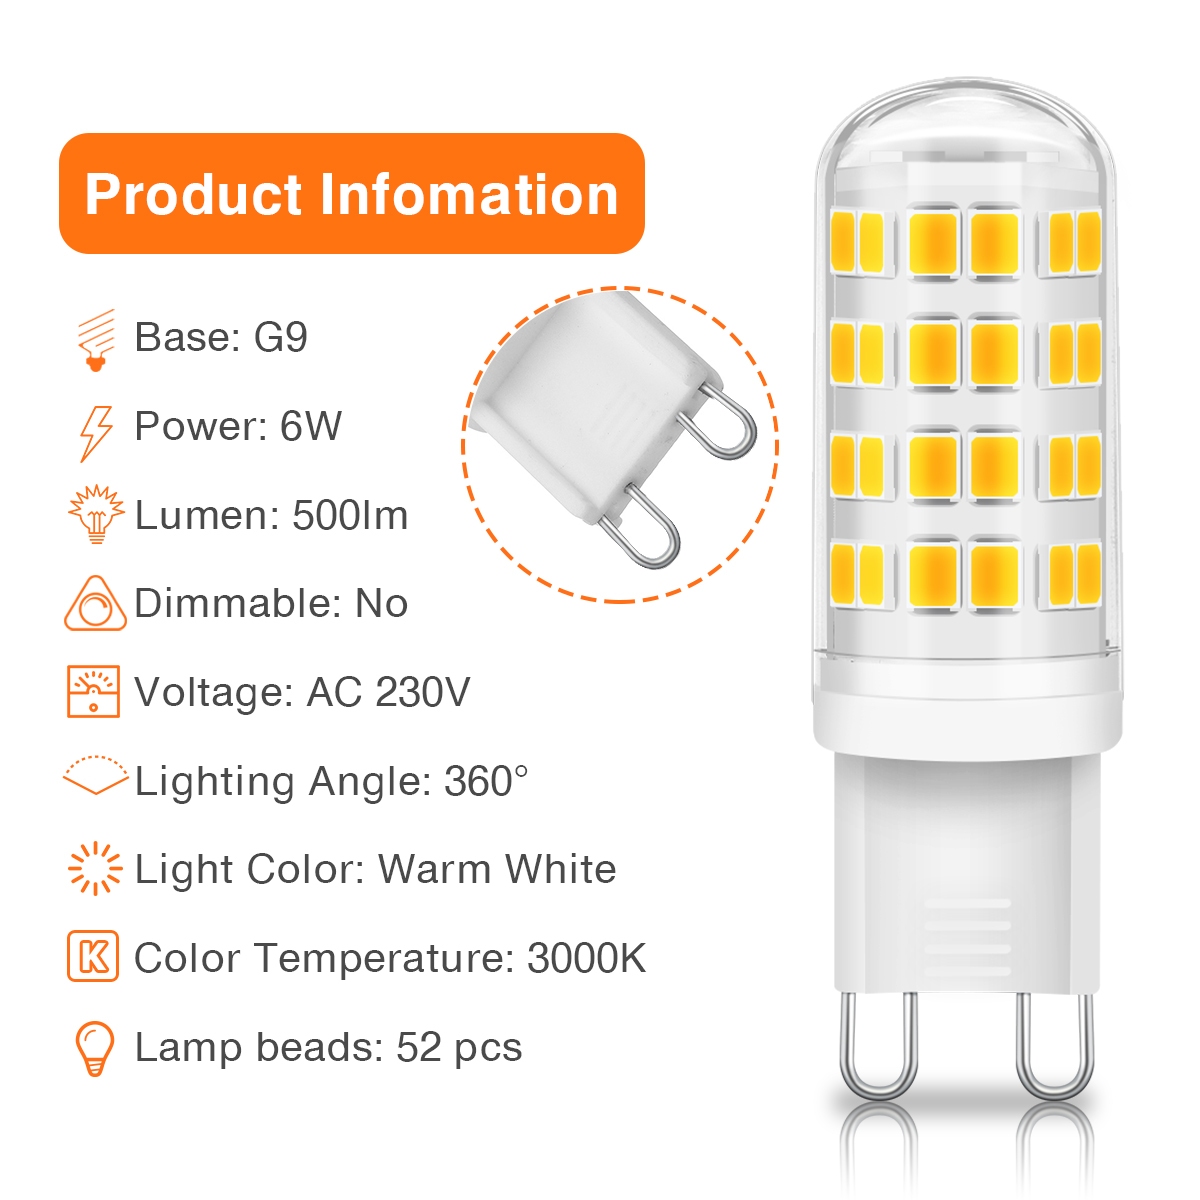 Kingso-6Pcs-6W-3000K-500lm-G9-LED-Bulb-with-52pcs-2835-Lamp-Beads-for-Living-Room-Bedroom-Kitchen-Di-1890738-2